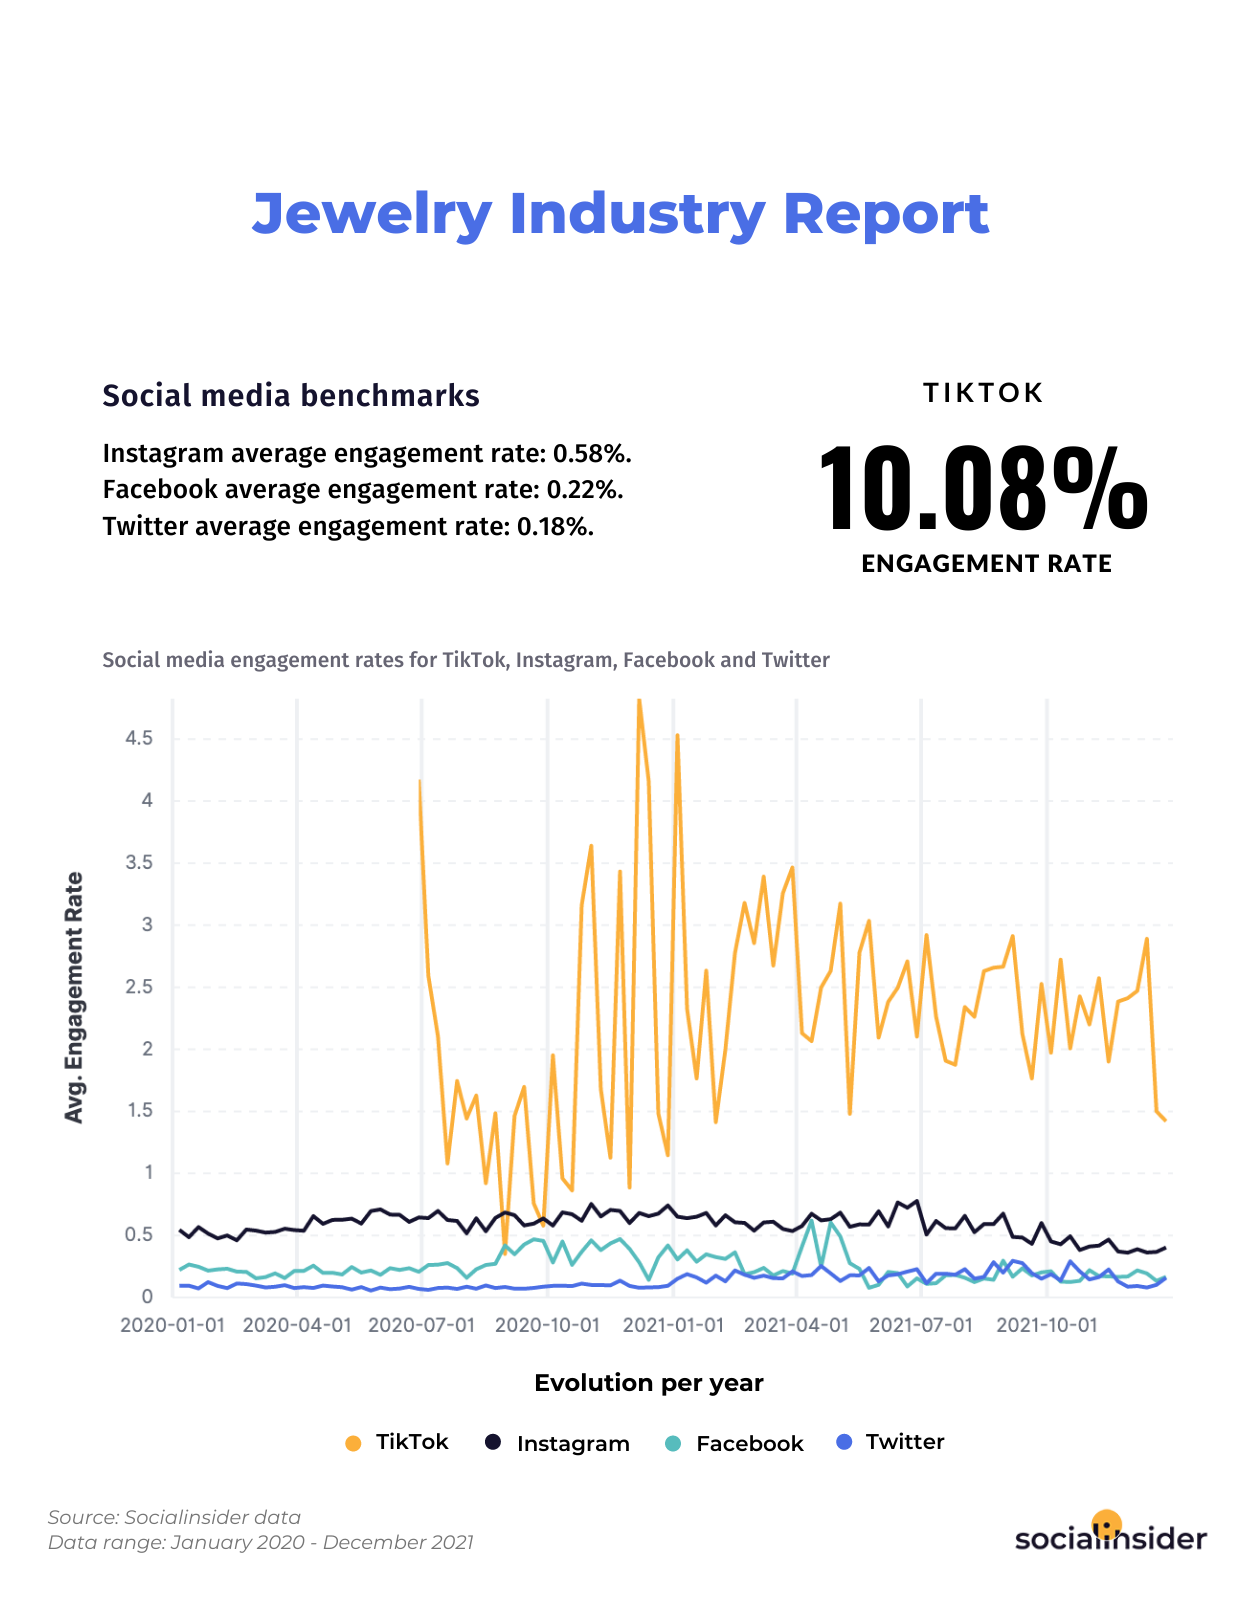 Engagement rates for the jewelry industry for 2022